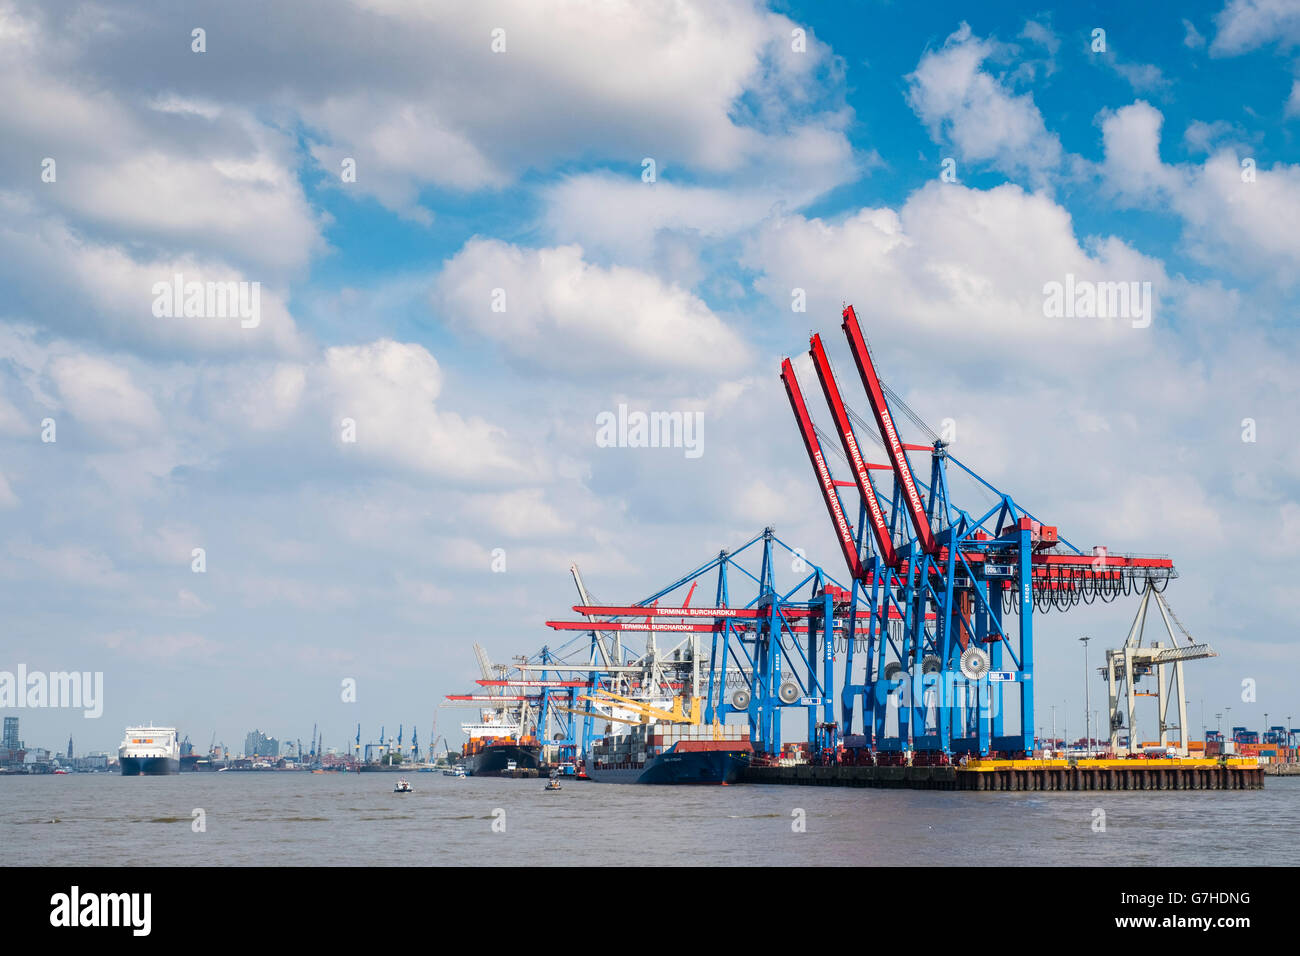 View of container terminal at Burchardkai Port of Hamburg on River Elbe in Germany Stock Photo